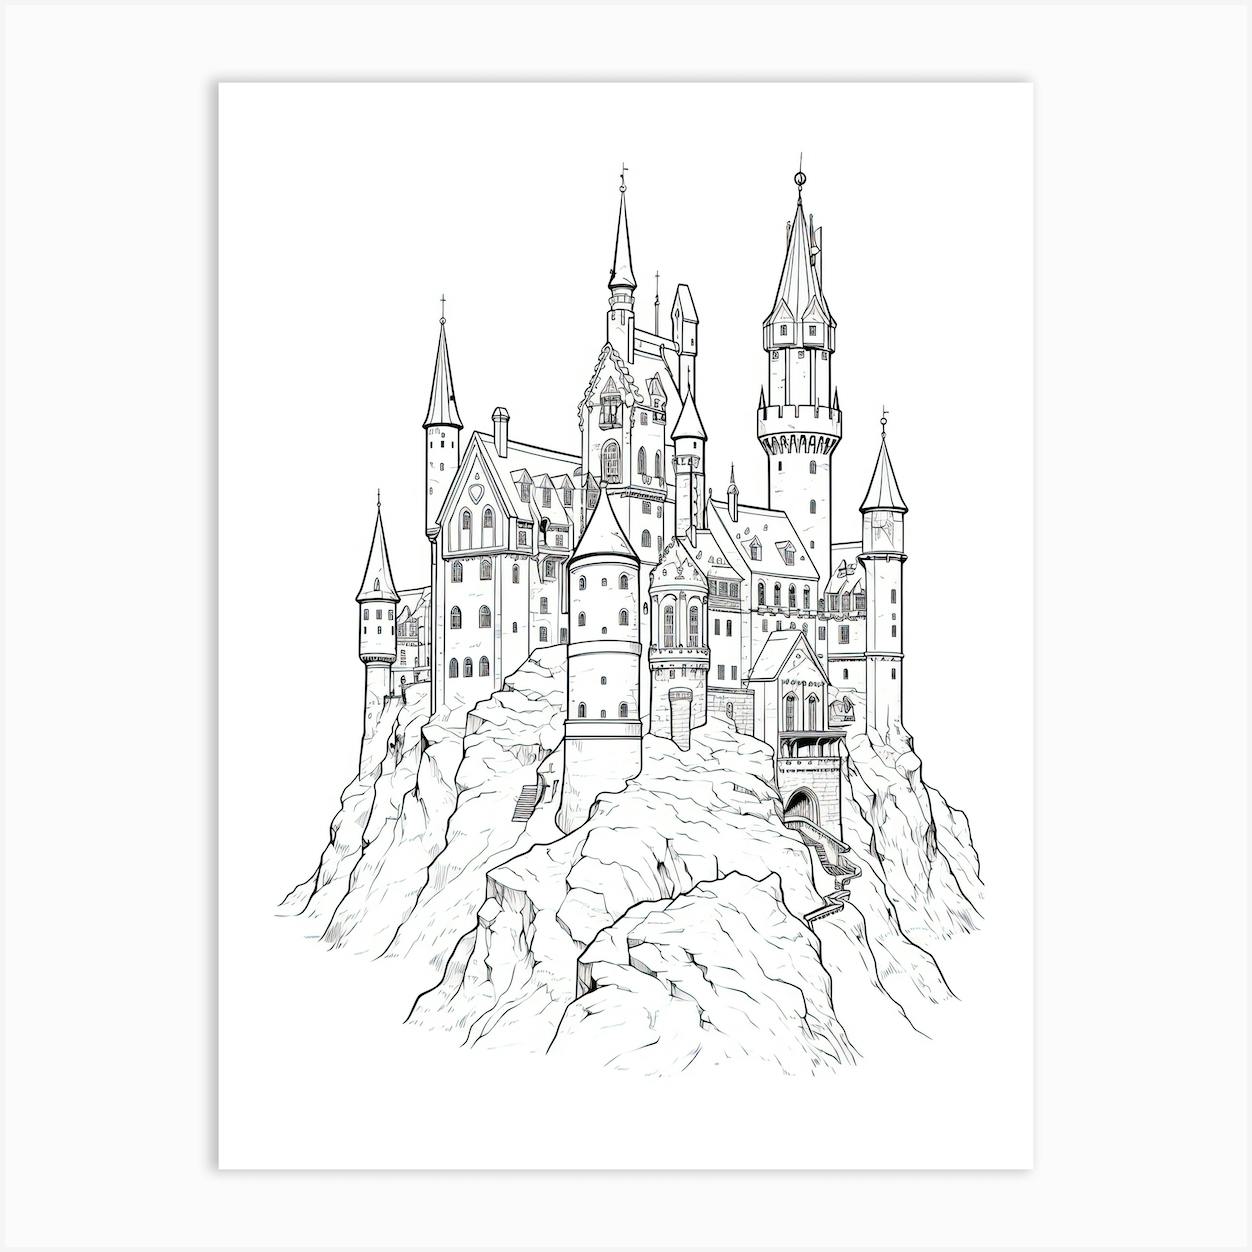 How to draw hogwarts from harry potter - YouTube